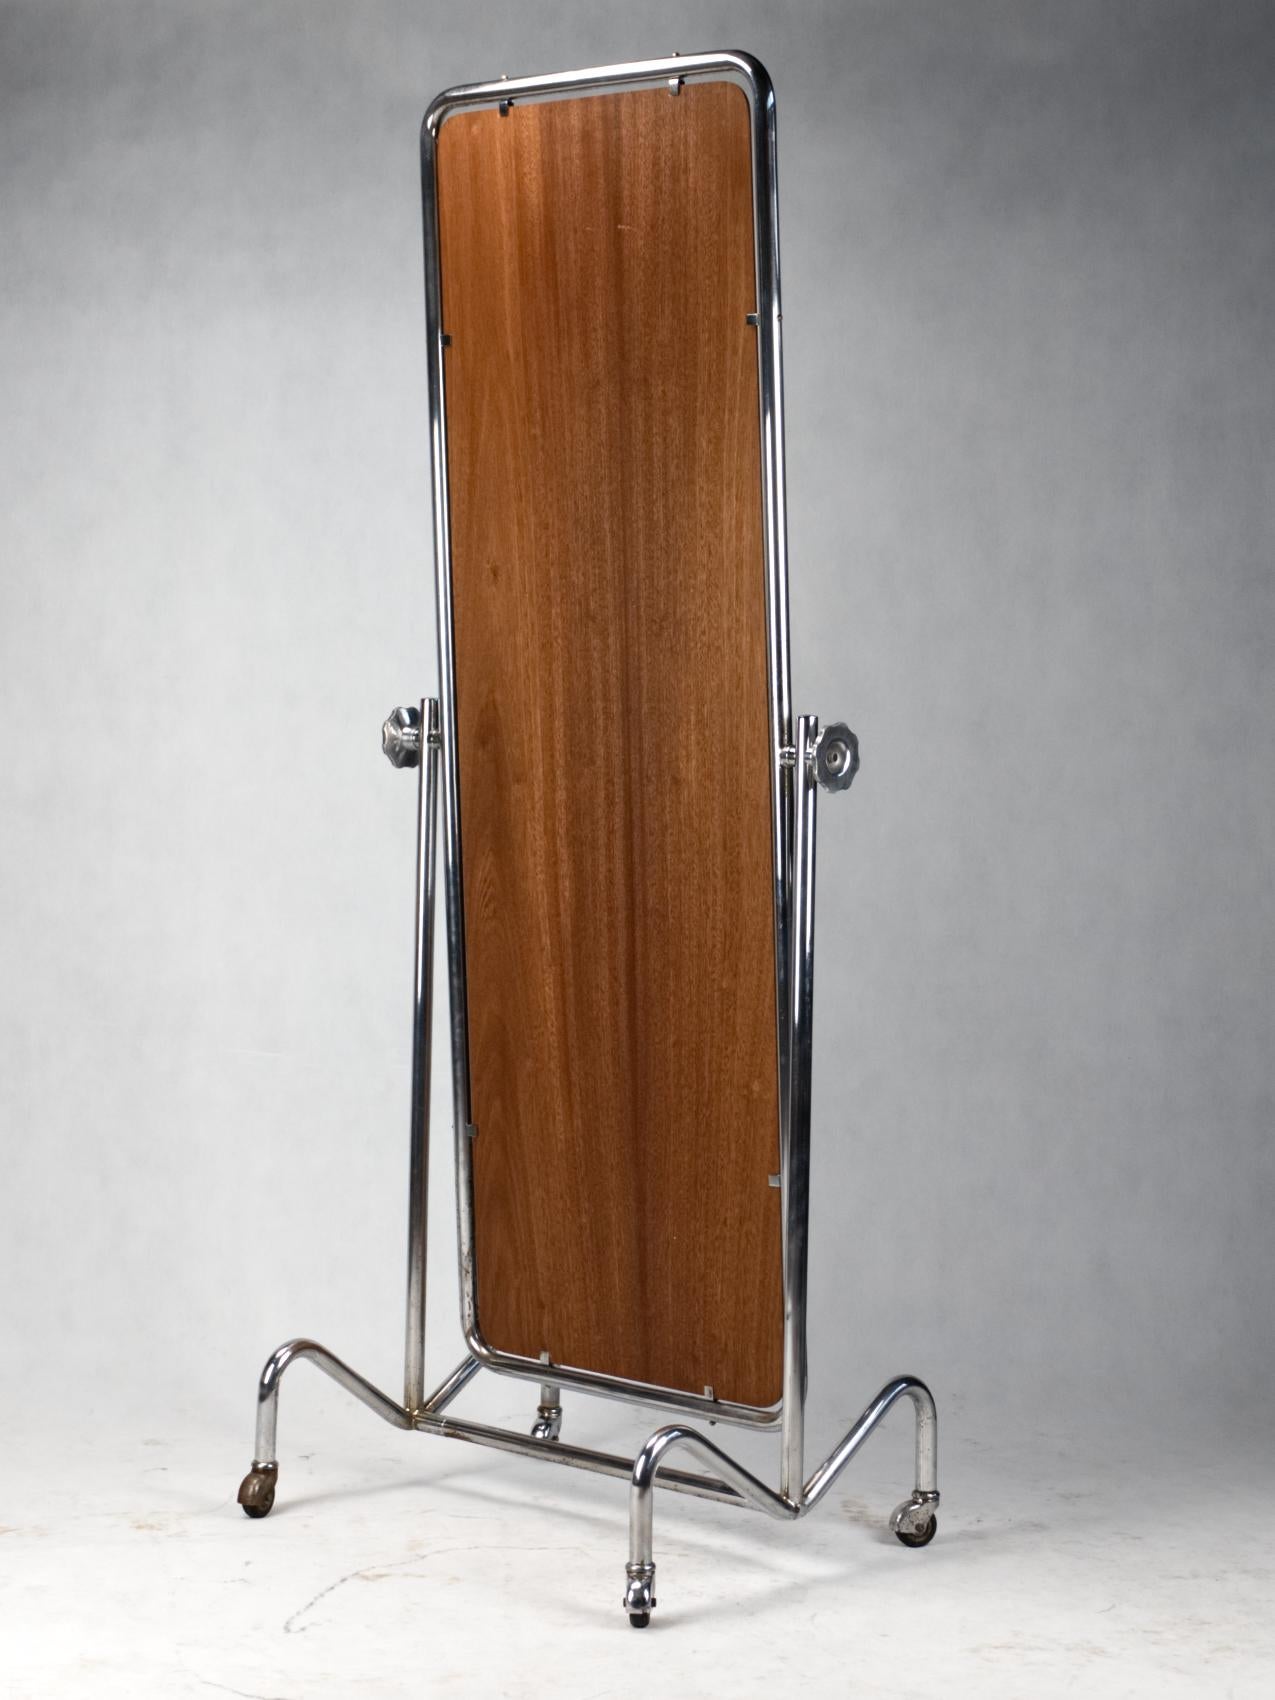 Tubular steel rolling full length mirror with rolling chrome frame, in original condition with visible wear consistent with its age and usage.